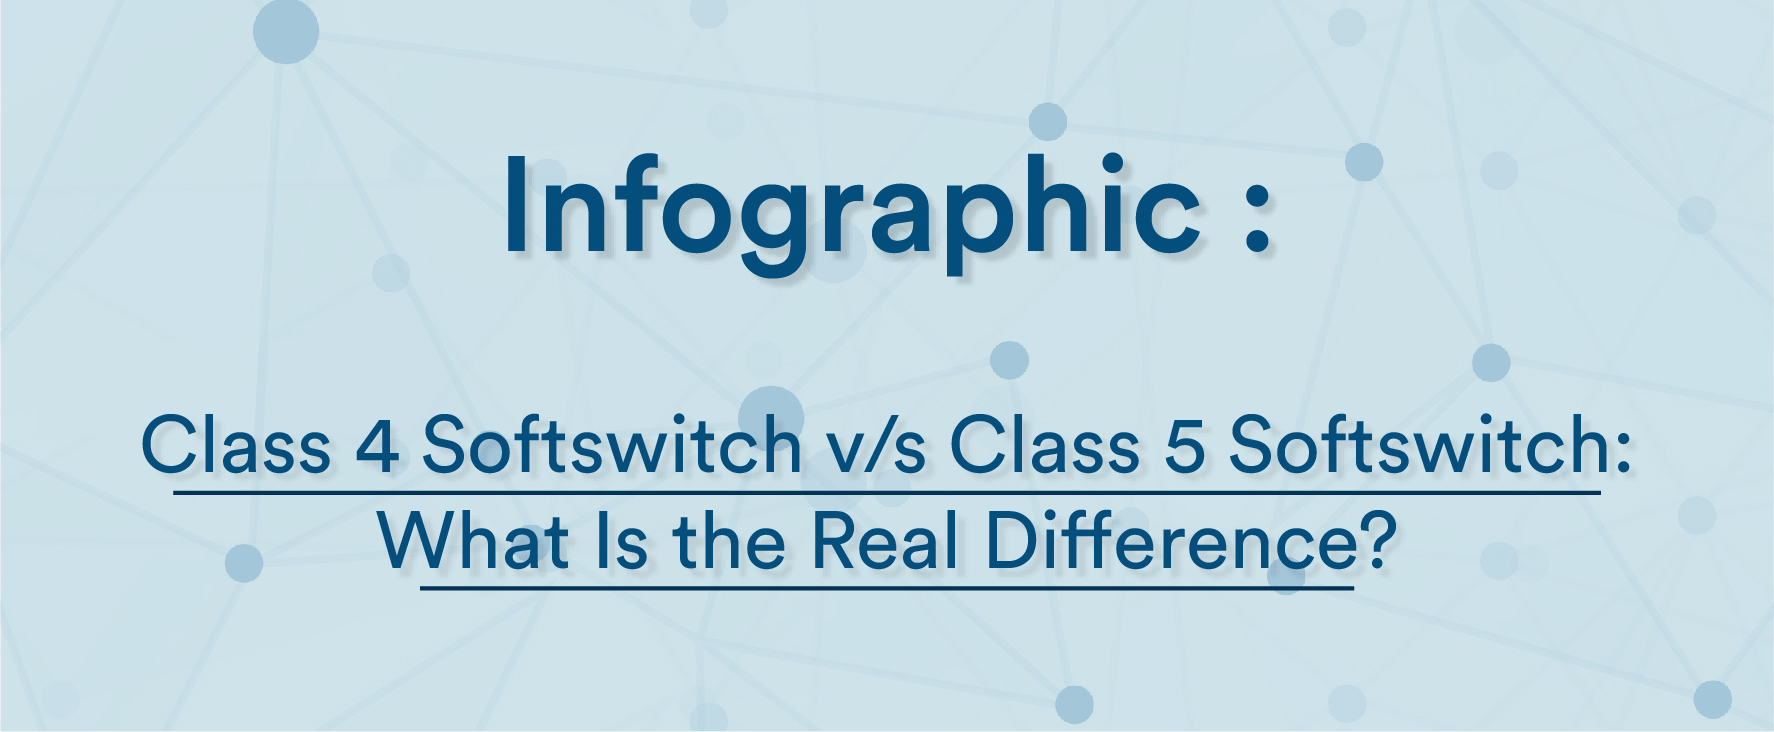 Infographic: Class 4 Softswitch v/s Class 5 Softswitch: What Is the Real Difference?